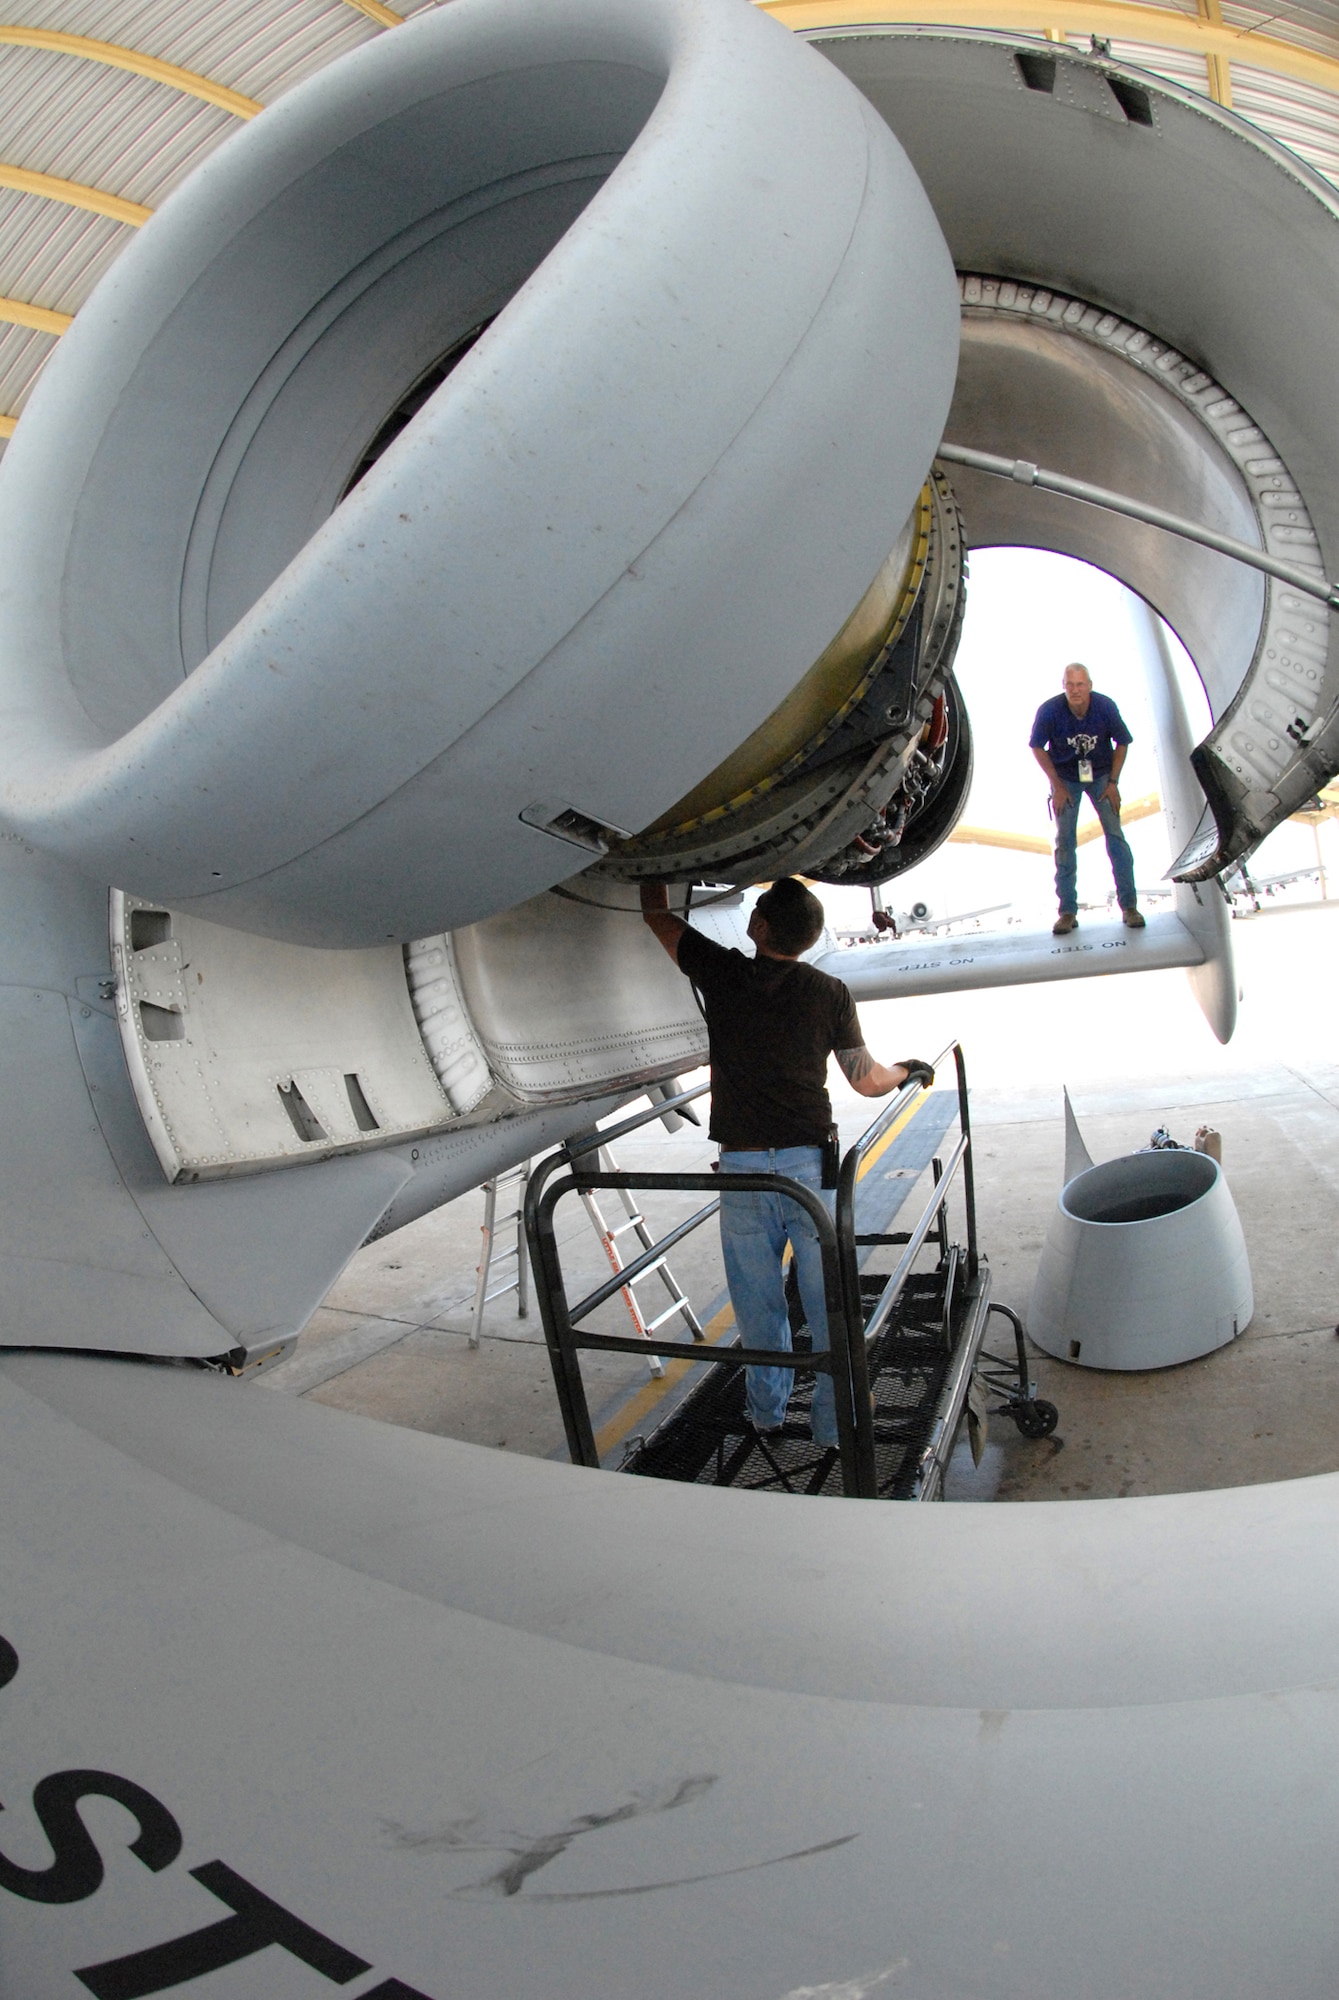 David Greenberg, left, and John Ezell, prepare a TF-34-100A turbo fan engine for removal from an A-10 Thunderbolt II at Whiteman Air Force Base, Mo., June 2.  This particular engine set a longevity record in the 442nd Fighter Wing after being installed on the same aircraft, tail number 605, for 10 years and accumulating 3,464.4 hours of operating time.  Both men are Air Reserve Technician crew chiefs in the 442nd Maintenance Squadron.  The 442nd is an Air Force Reserve unit based at Whiteman.  (U.S. Air Force photo/Master Sgt. Bill Huntington)